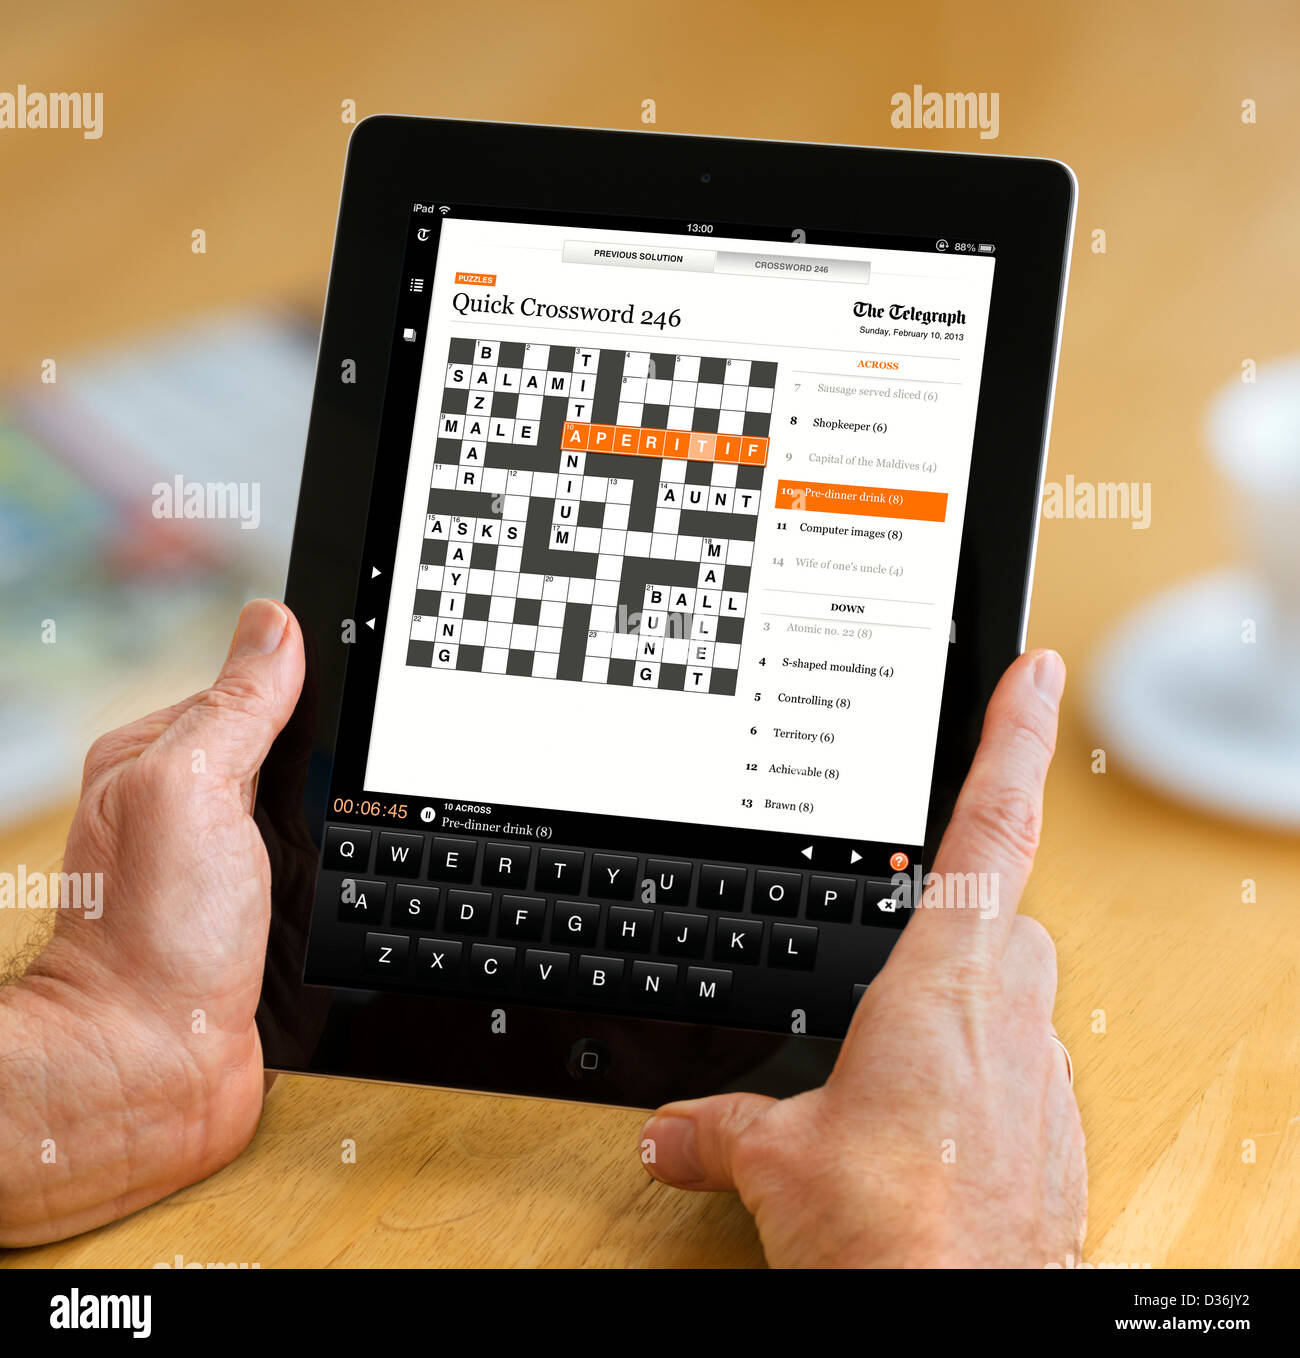 Doing the crossword on the Telegraph app on an Apple iPad 4th generation retina display tablet computer Stock Photo